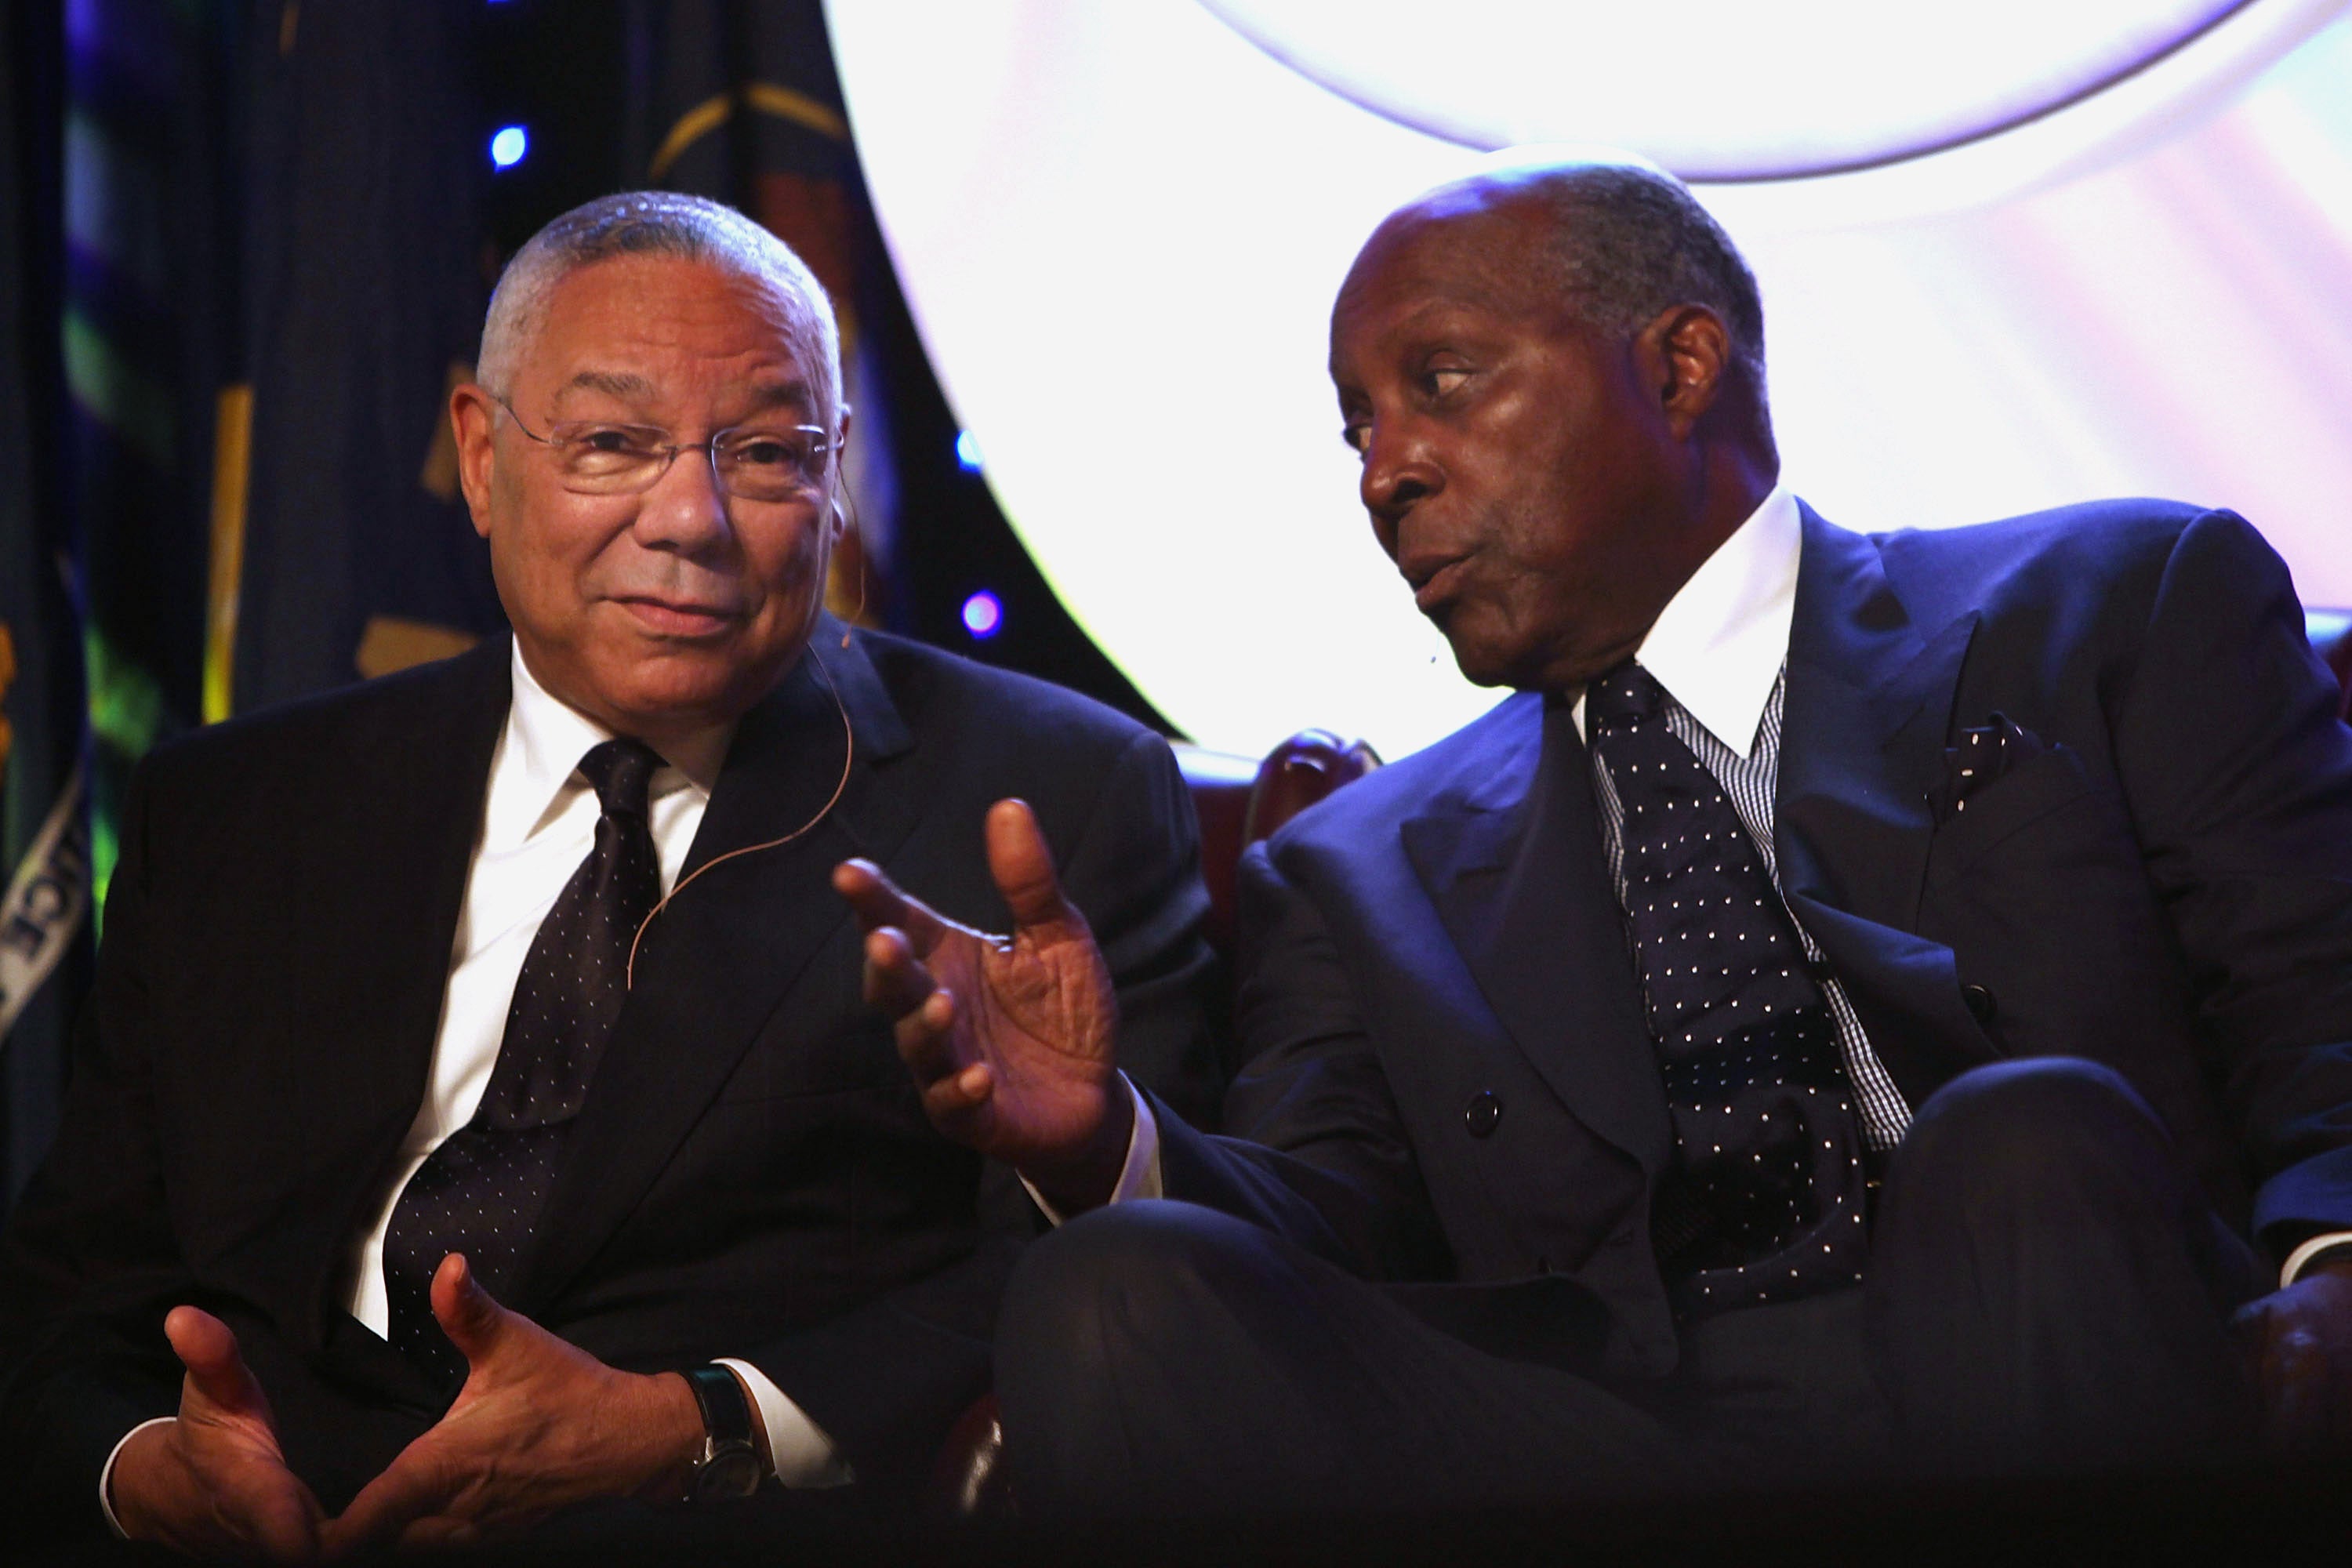 With Colin Powell in 2009